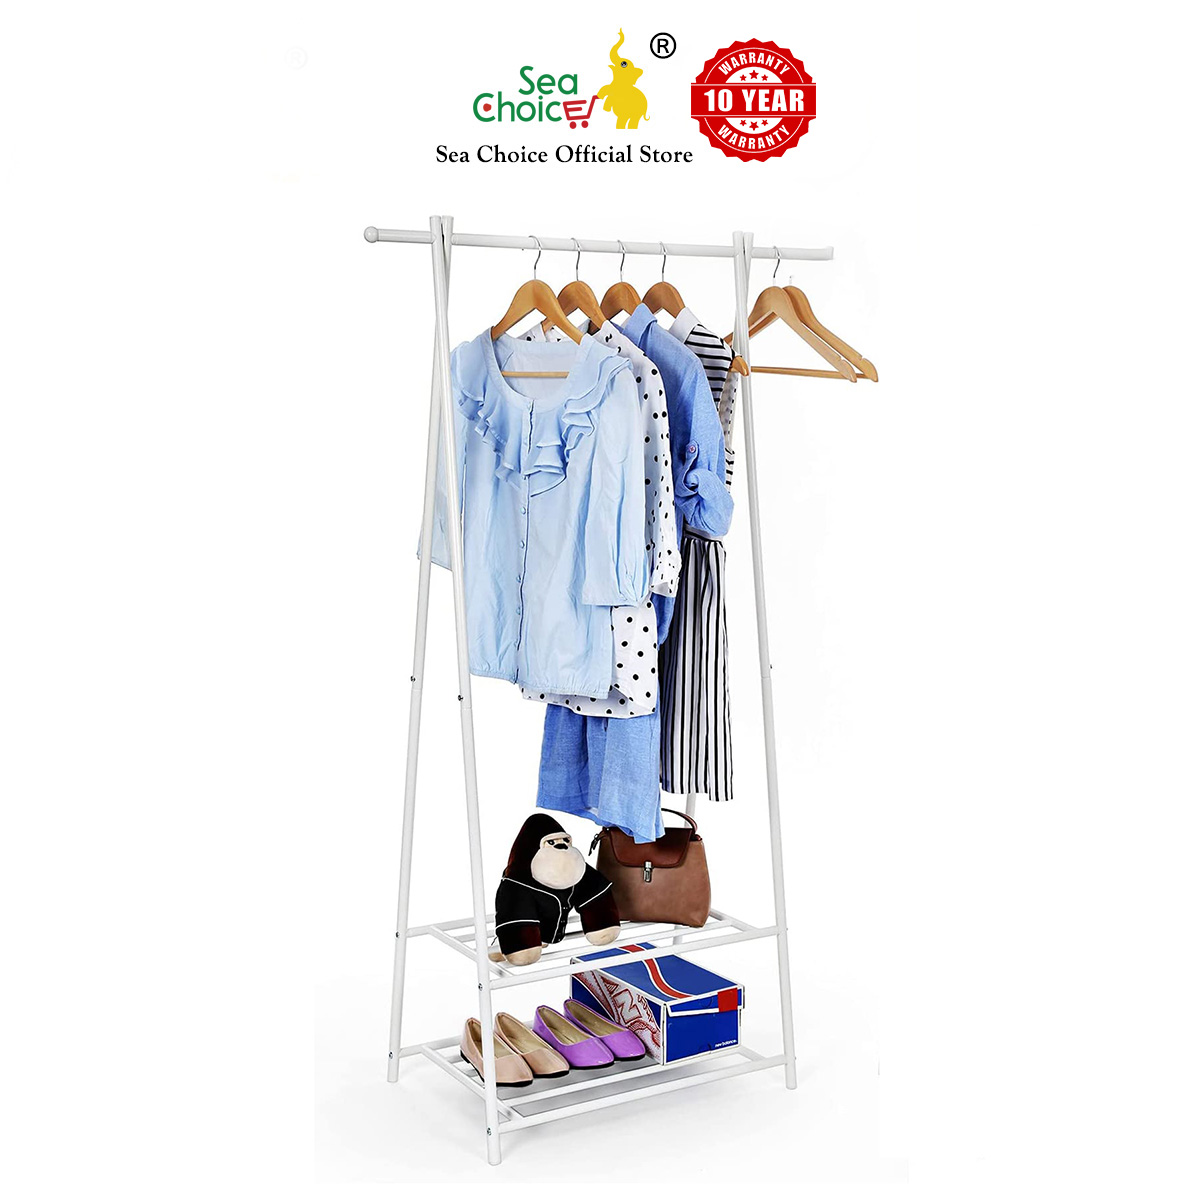 Shelves - A simple 2-layer A-shaped clothes rack that can store a lot of